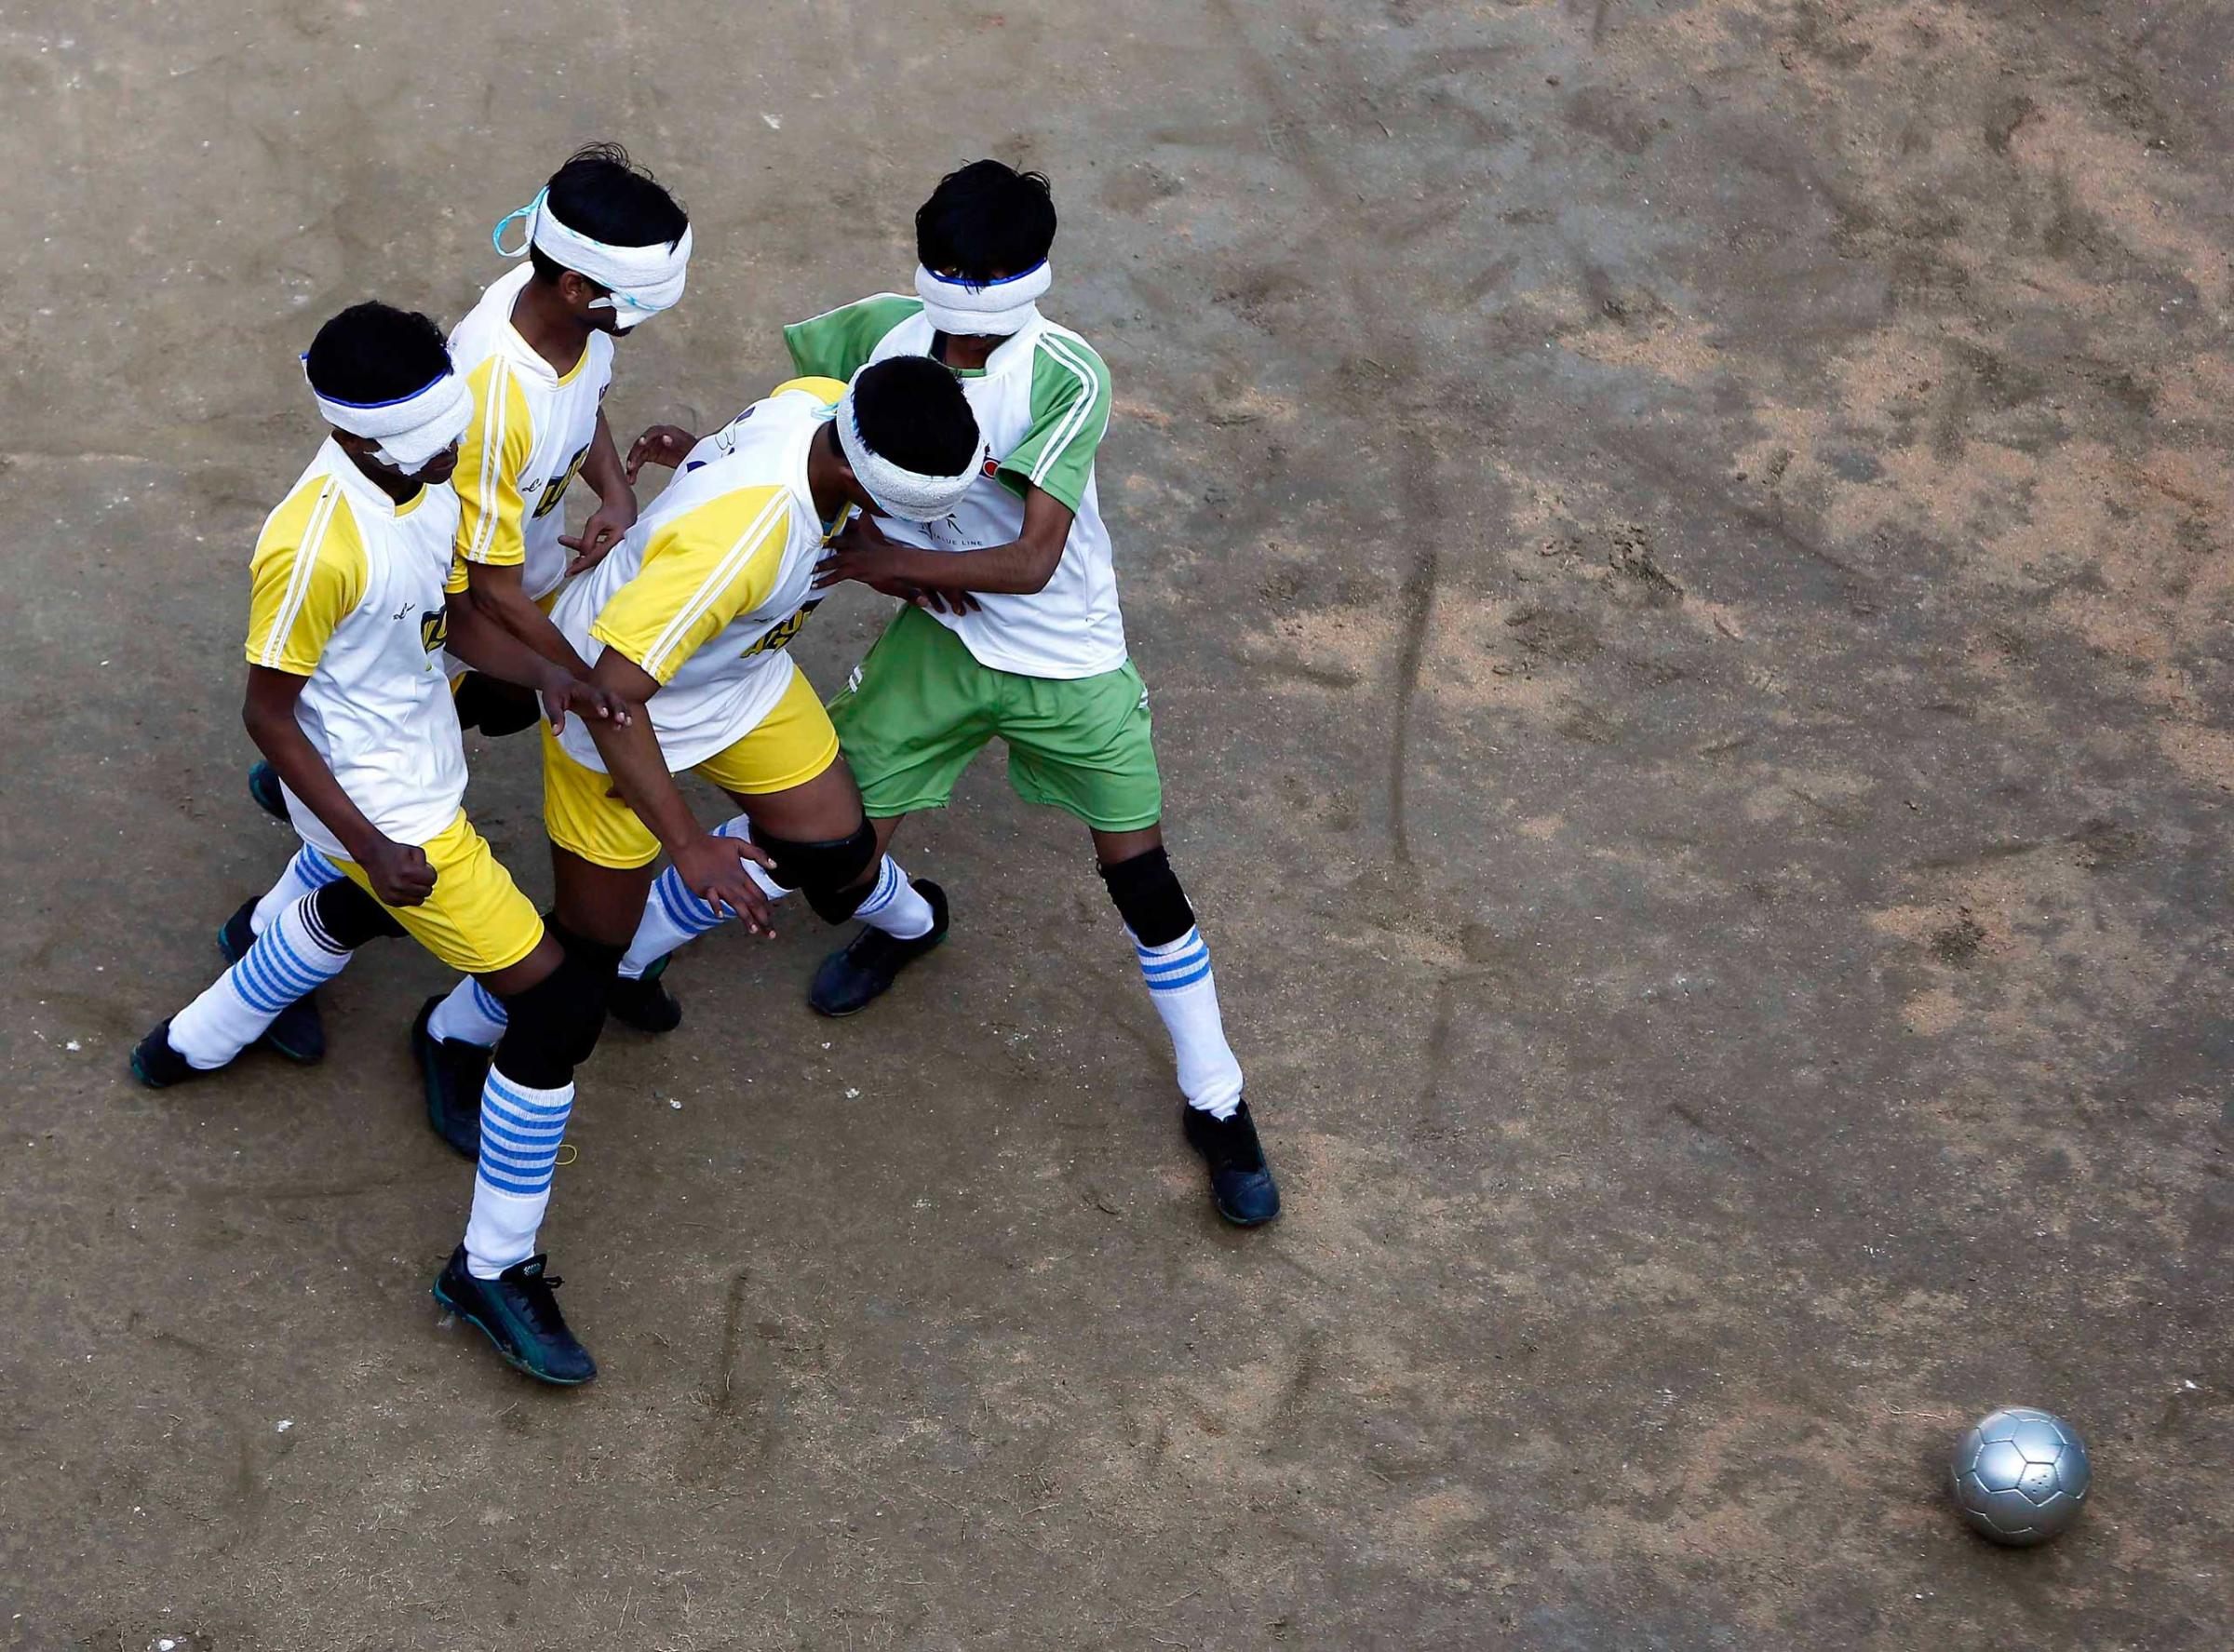 Jan. 5, 2015. Visually impaired students of a school for the blind fight for the ball during a soccer match inside their school in New Delhi, India.